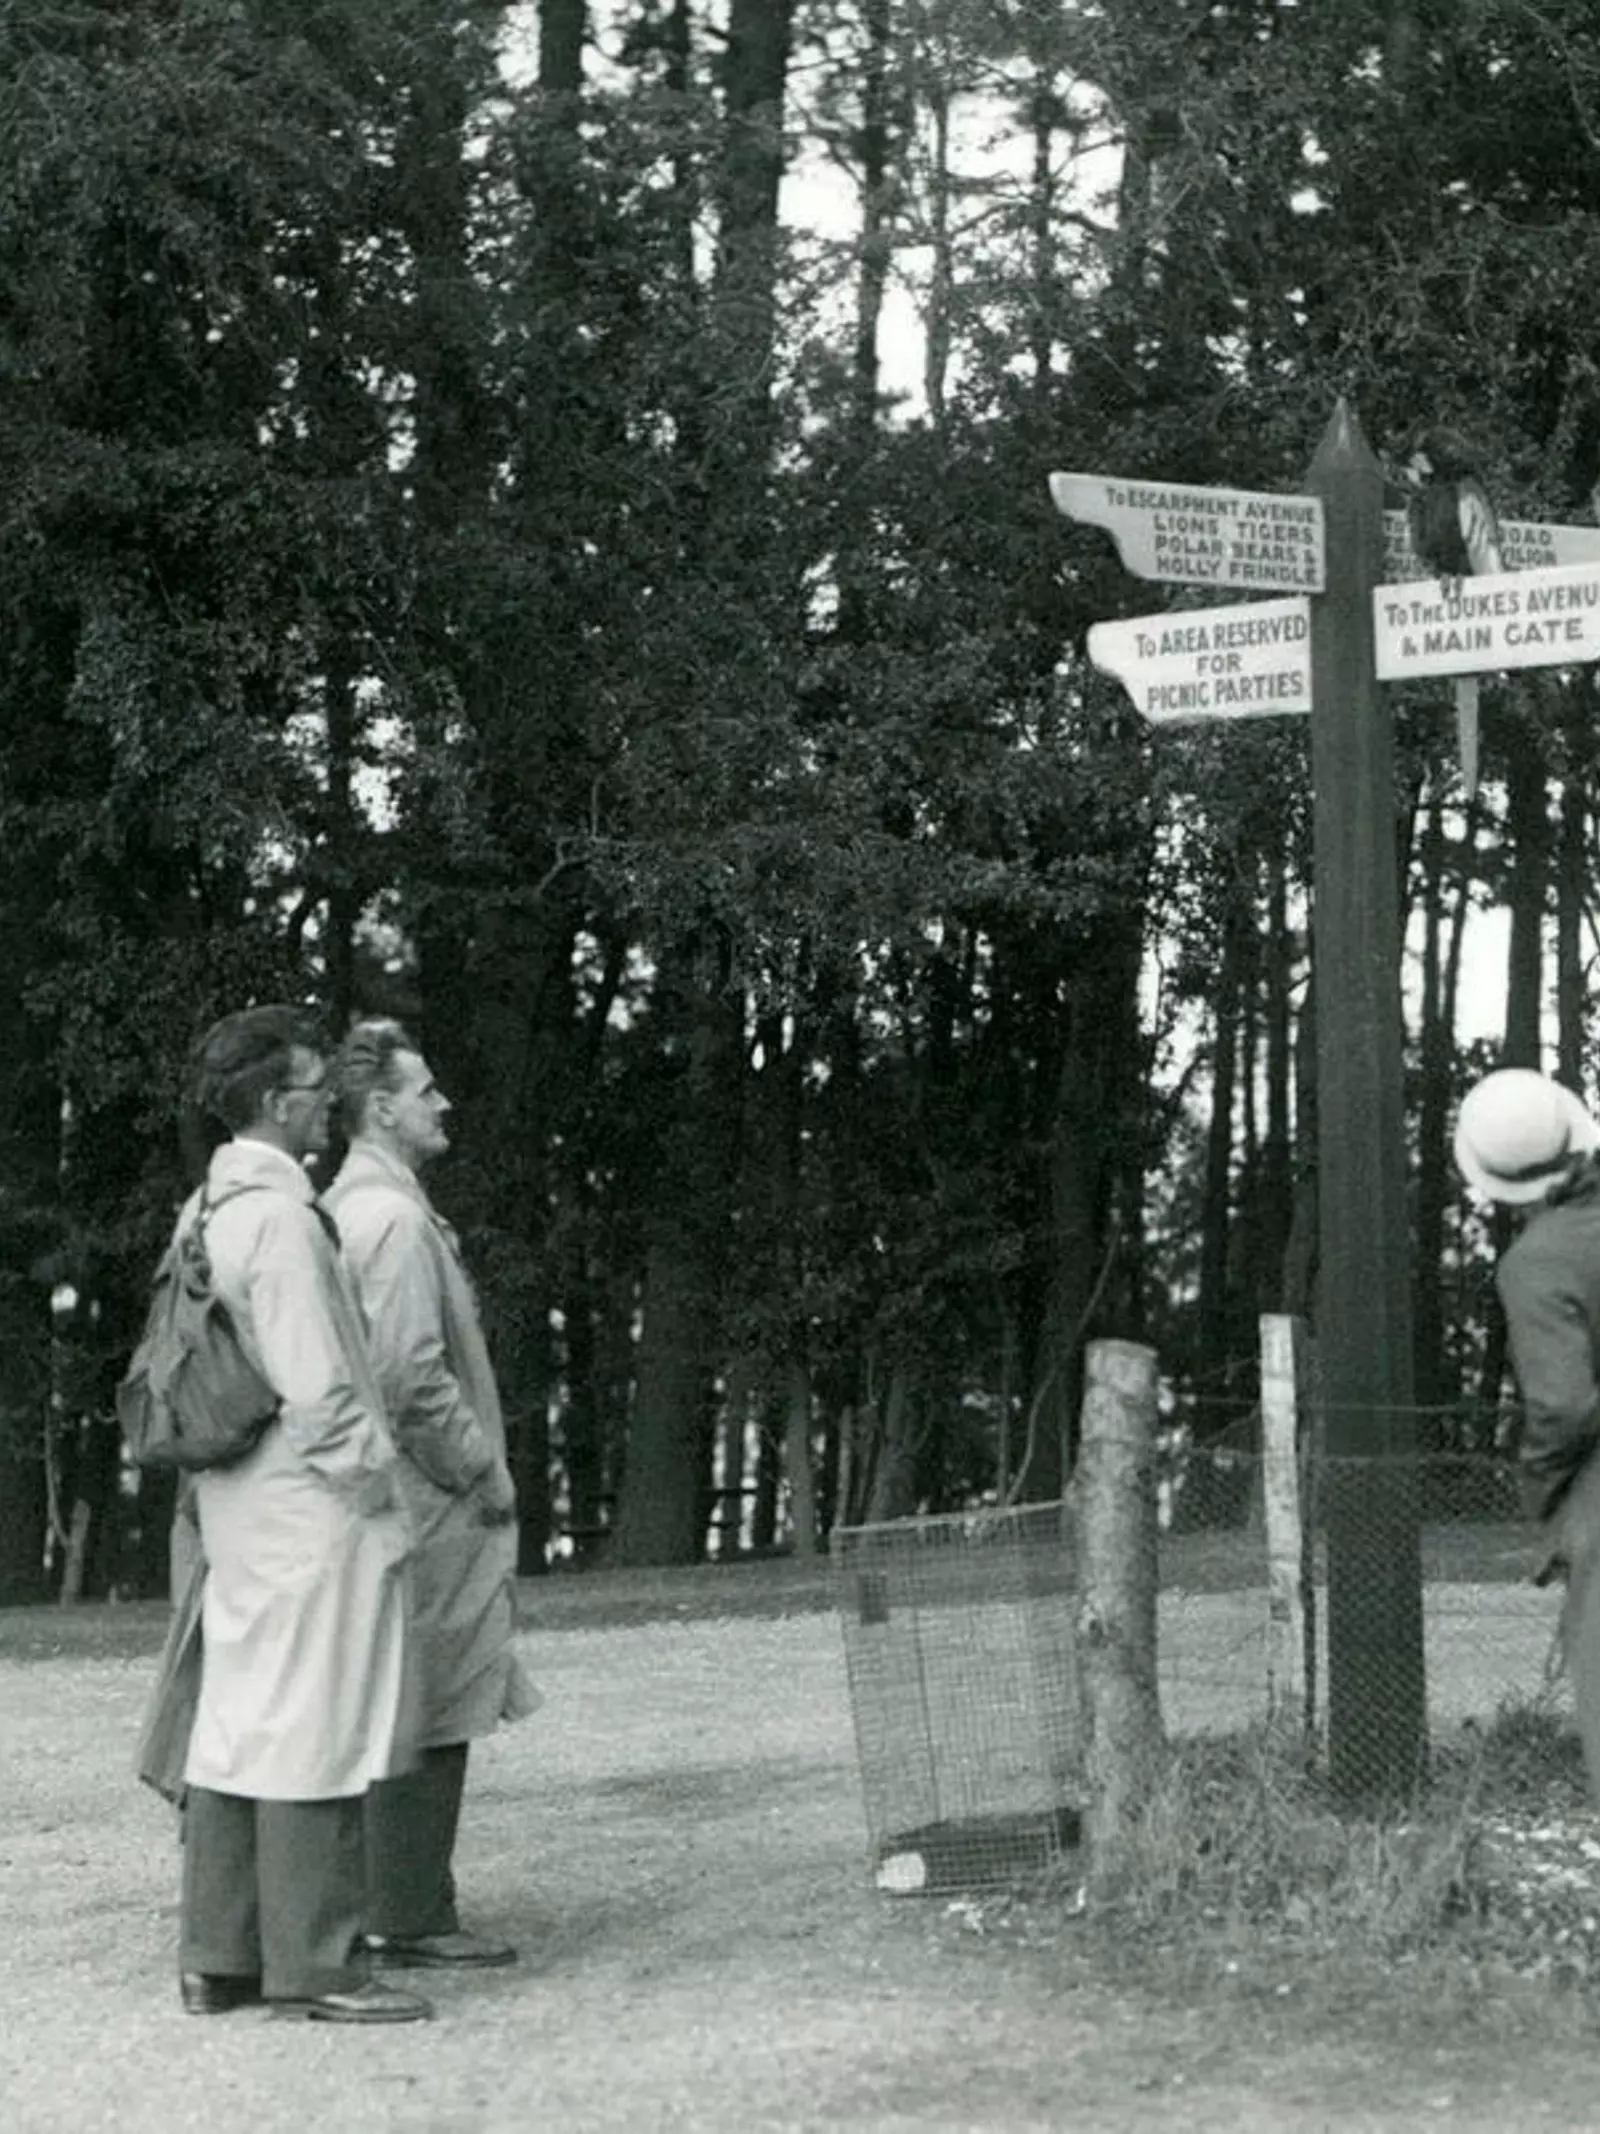 Whipsnade visitors looking up at Macaws resting on the lower Duke's Avenue signpost in October 1934. 